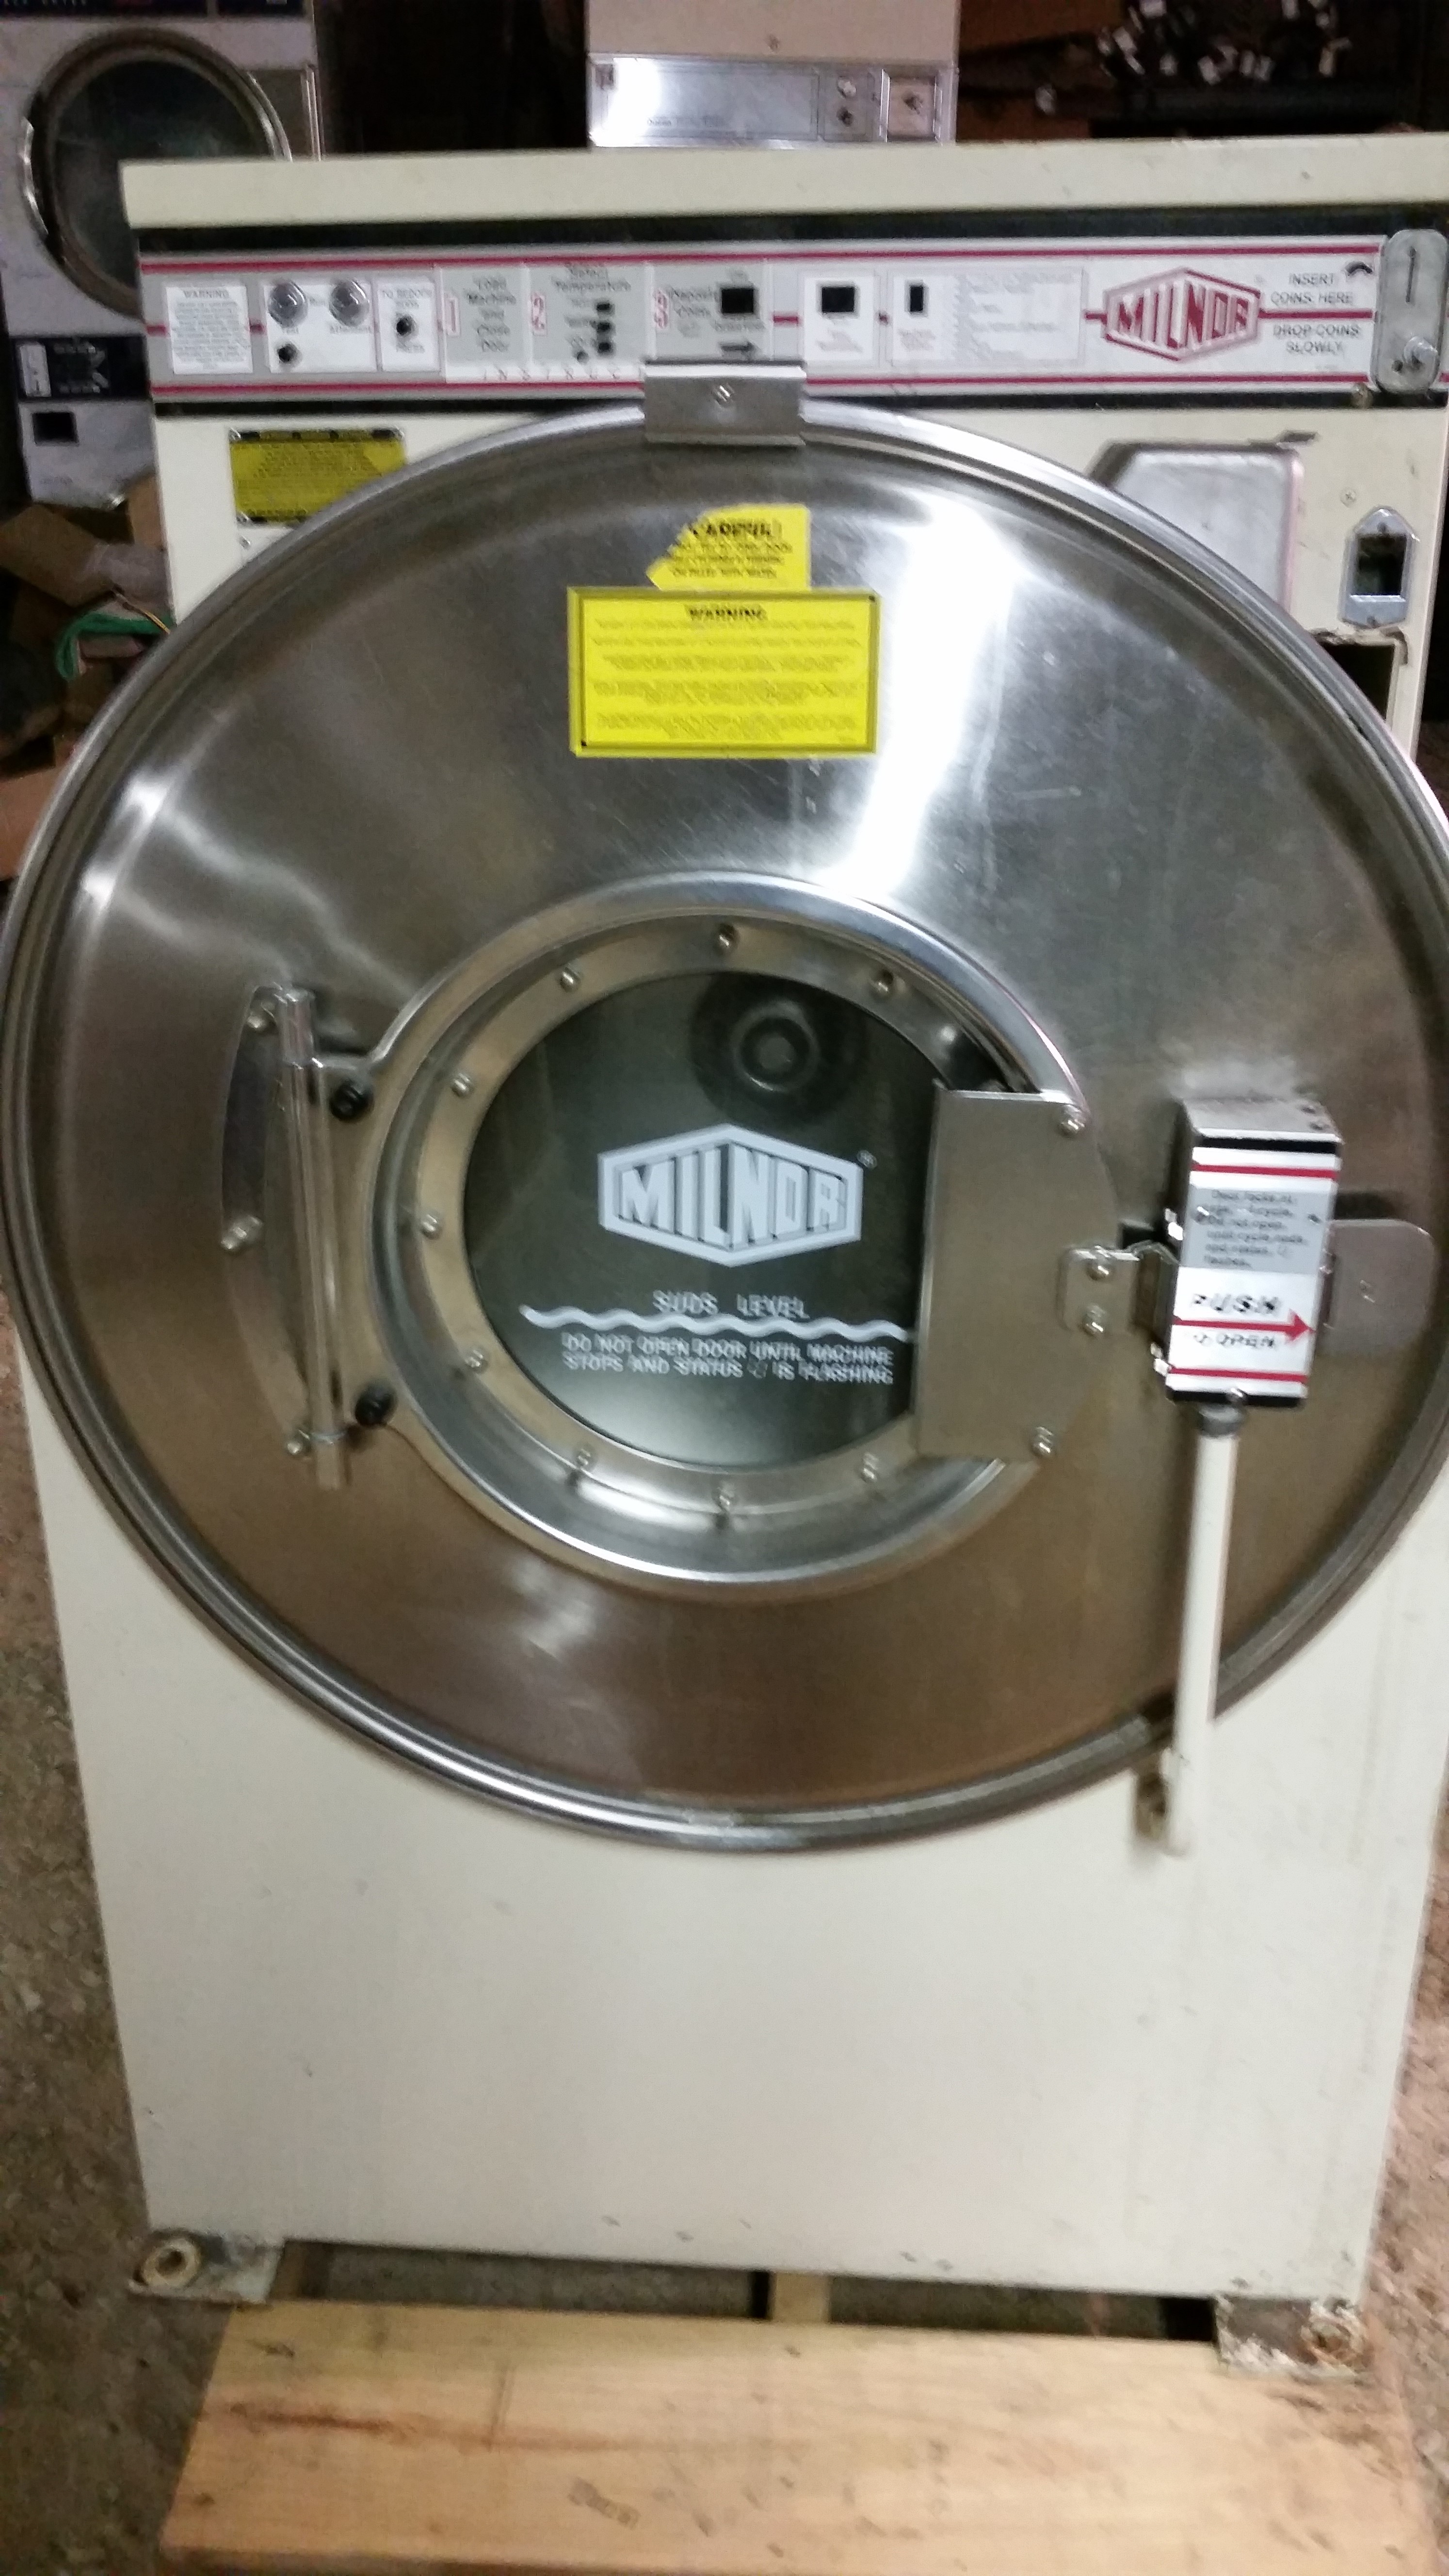 Milnor 35LB Coin Operated Washer